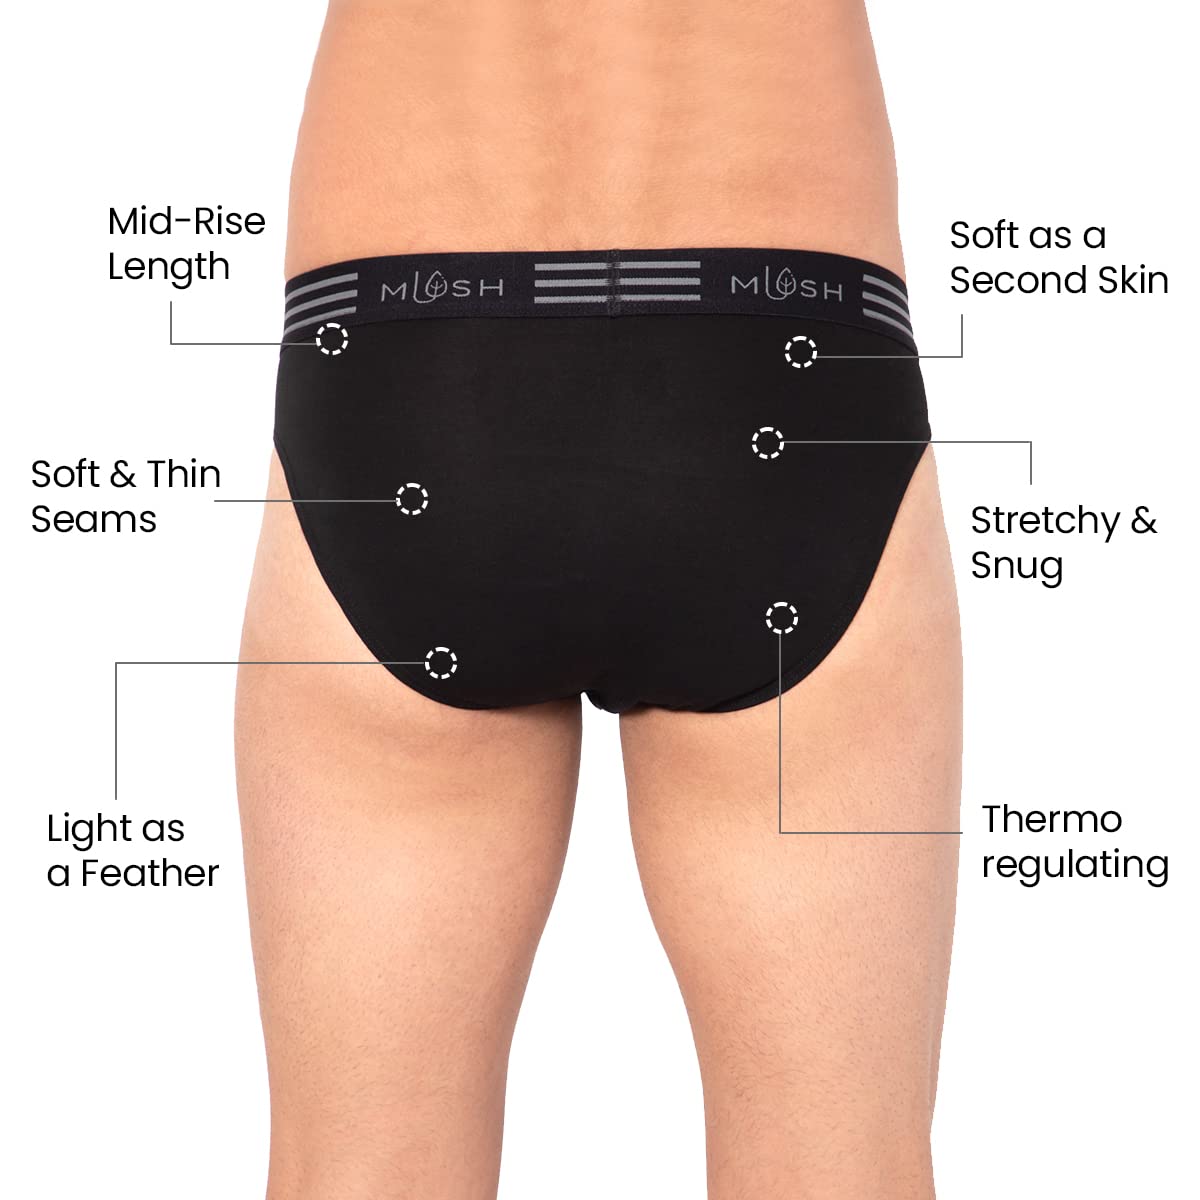 Mush Ultra Soft, Breathable, Feather Light Men's Bamboo Brief || Naturally Anti-Odor and Anti-Microbial Bamboo Innerwear Pack of 1 (S, Black)